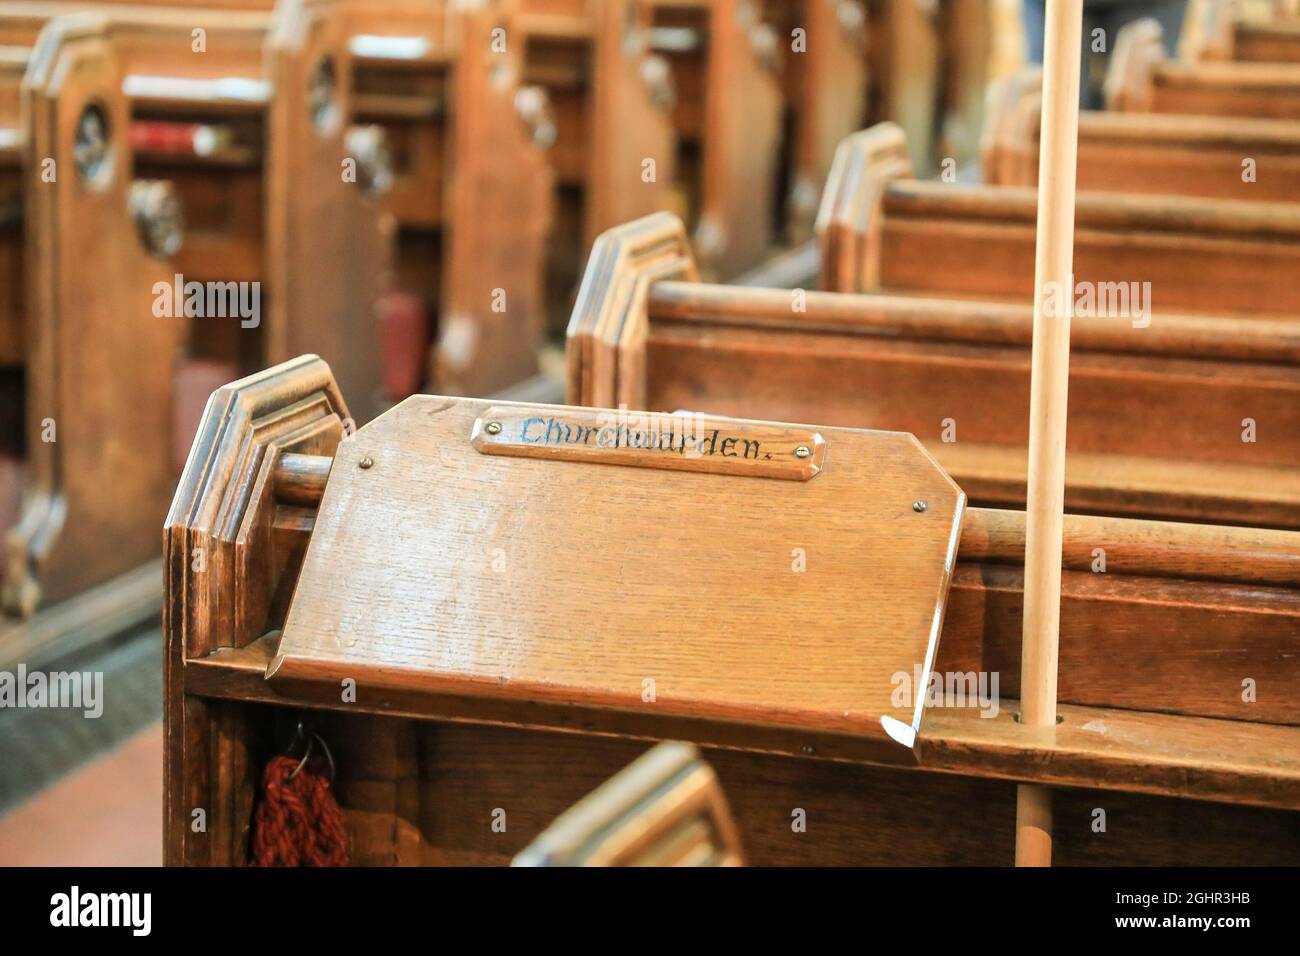 A wooden lectern with a sign on it saying 'churchwarden', and wooden pews in a church, England, UK Stock Photo